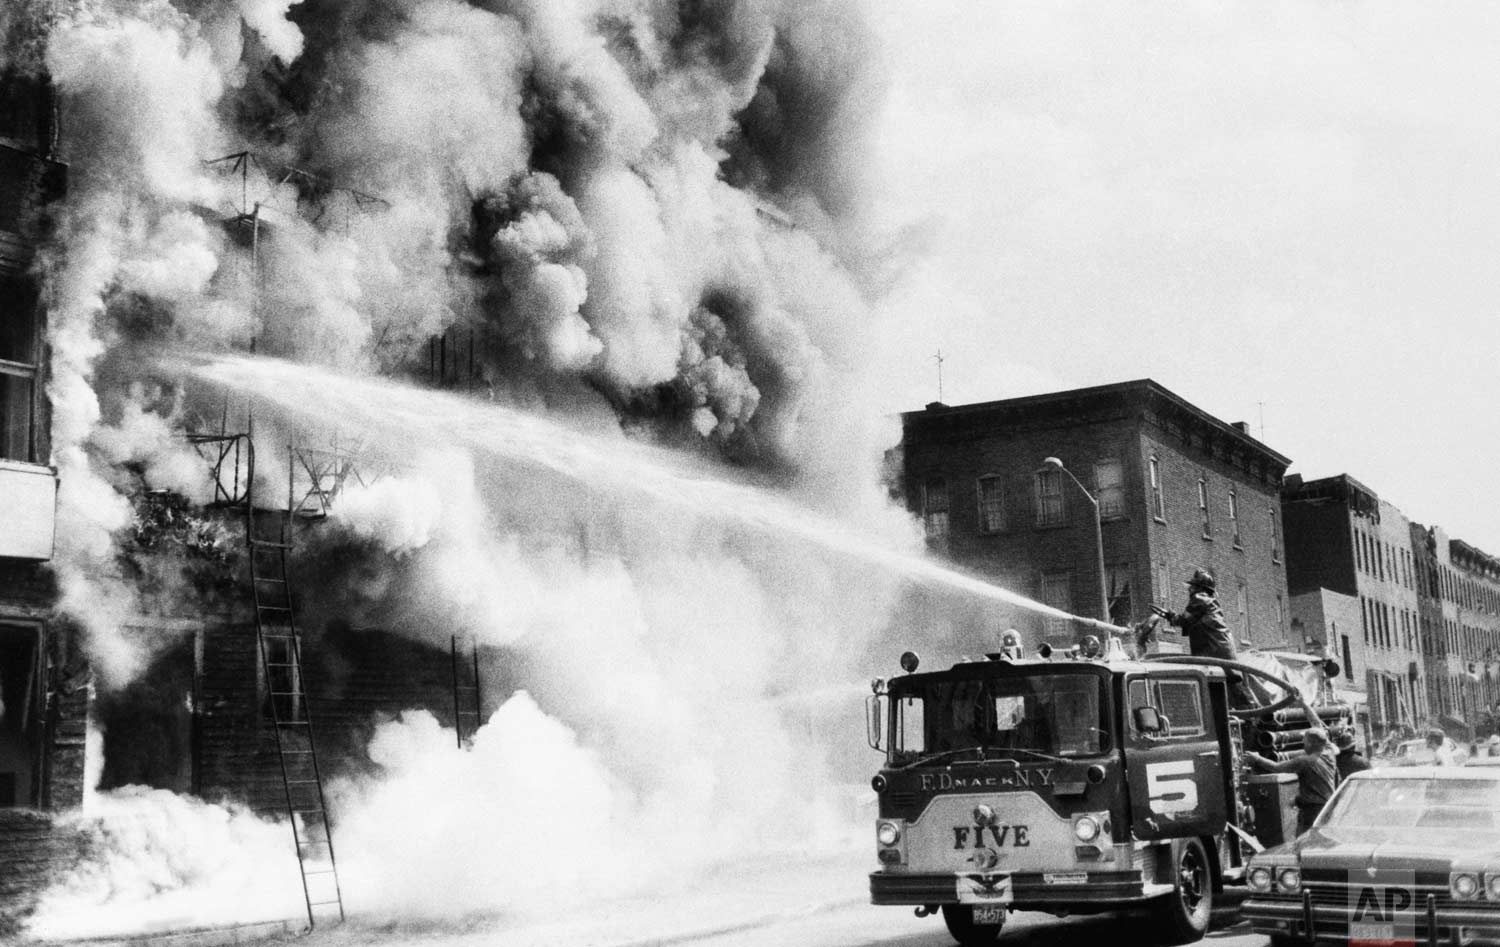  Firemen fight a blaze above a row of looted stores in New York's Brooklyn borough, July 14, 1977, the day after the power failure. The stores were looted during blackout. (AP Photo) 